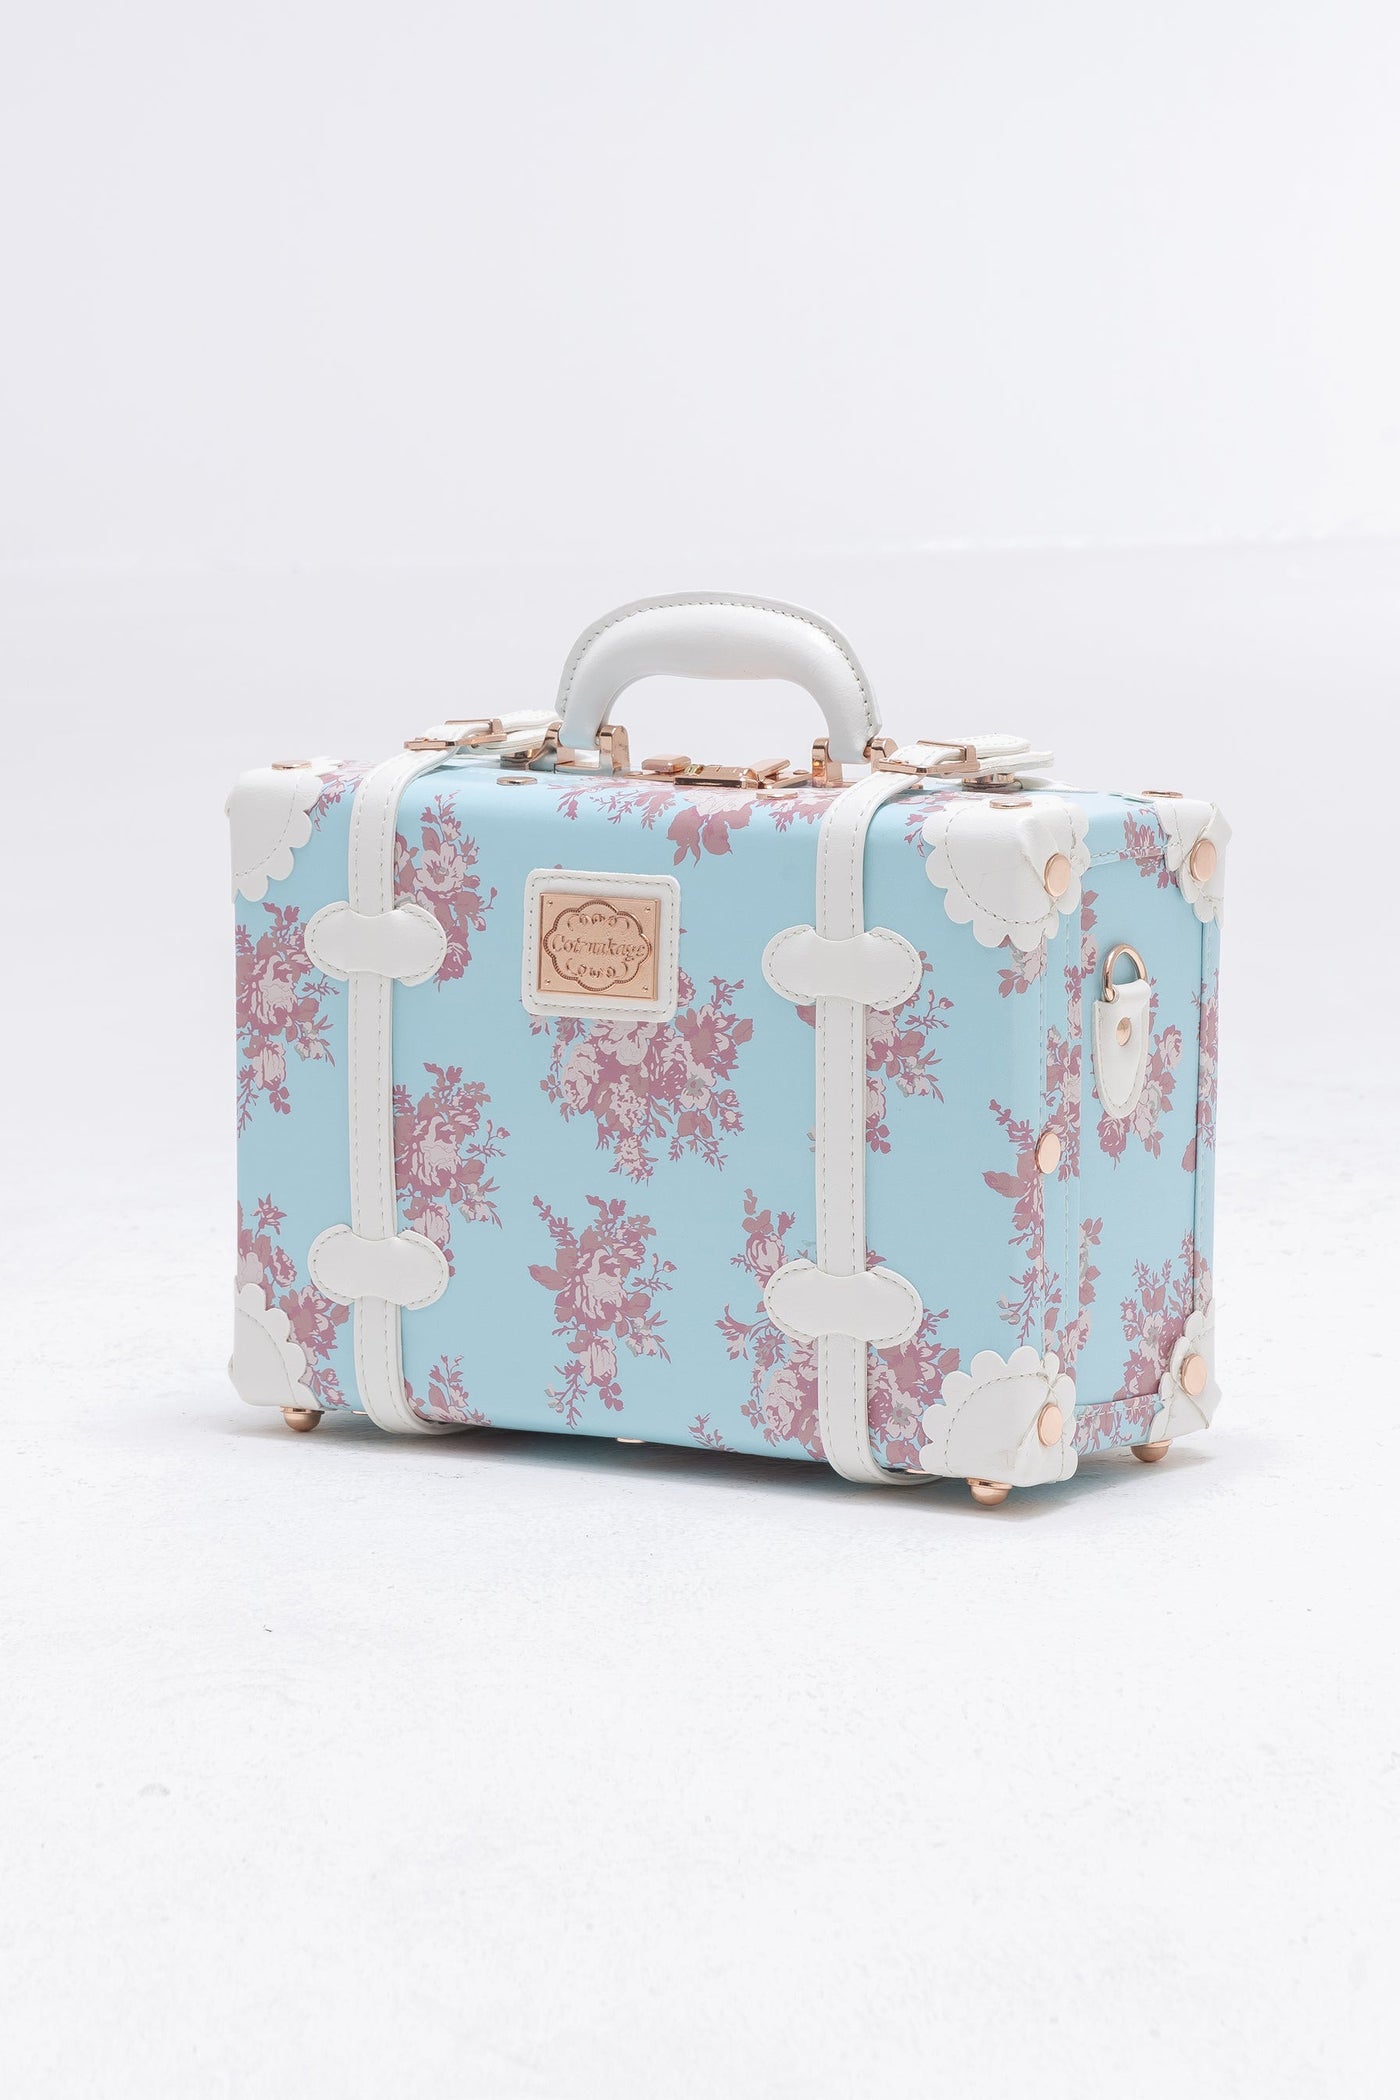  COTRUNKAGE Small Floral Round Hat Box Vintage Luggage Cosmetic  Case (D.12, Cream White)